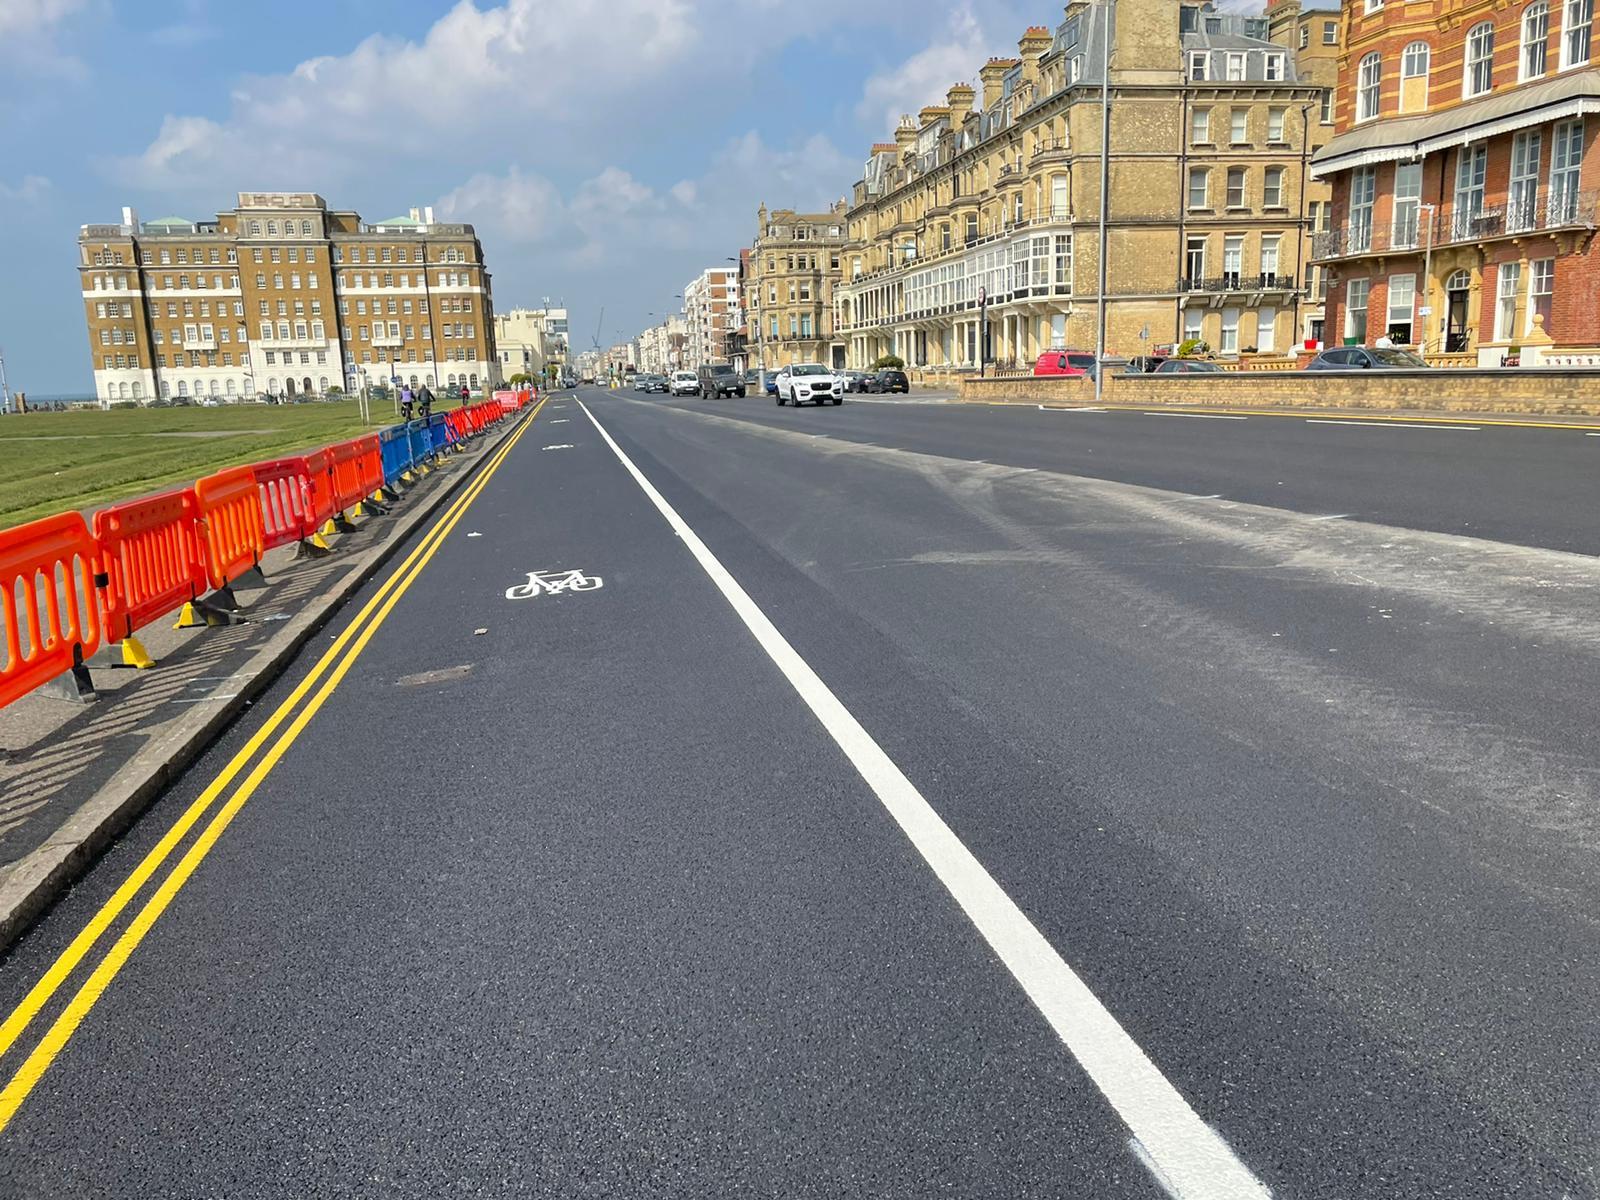 The A259 cycle lane on Brighton seafront